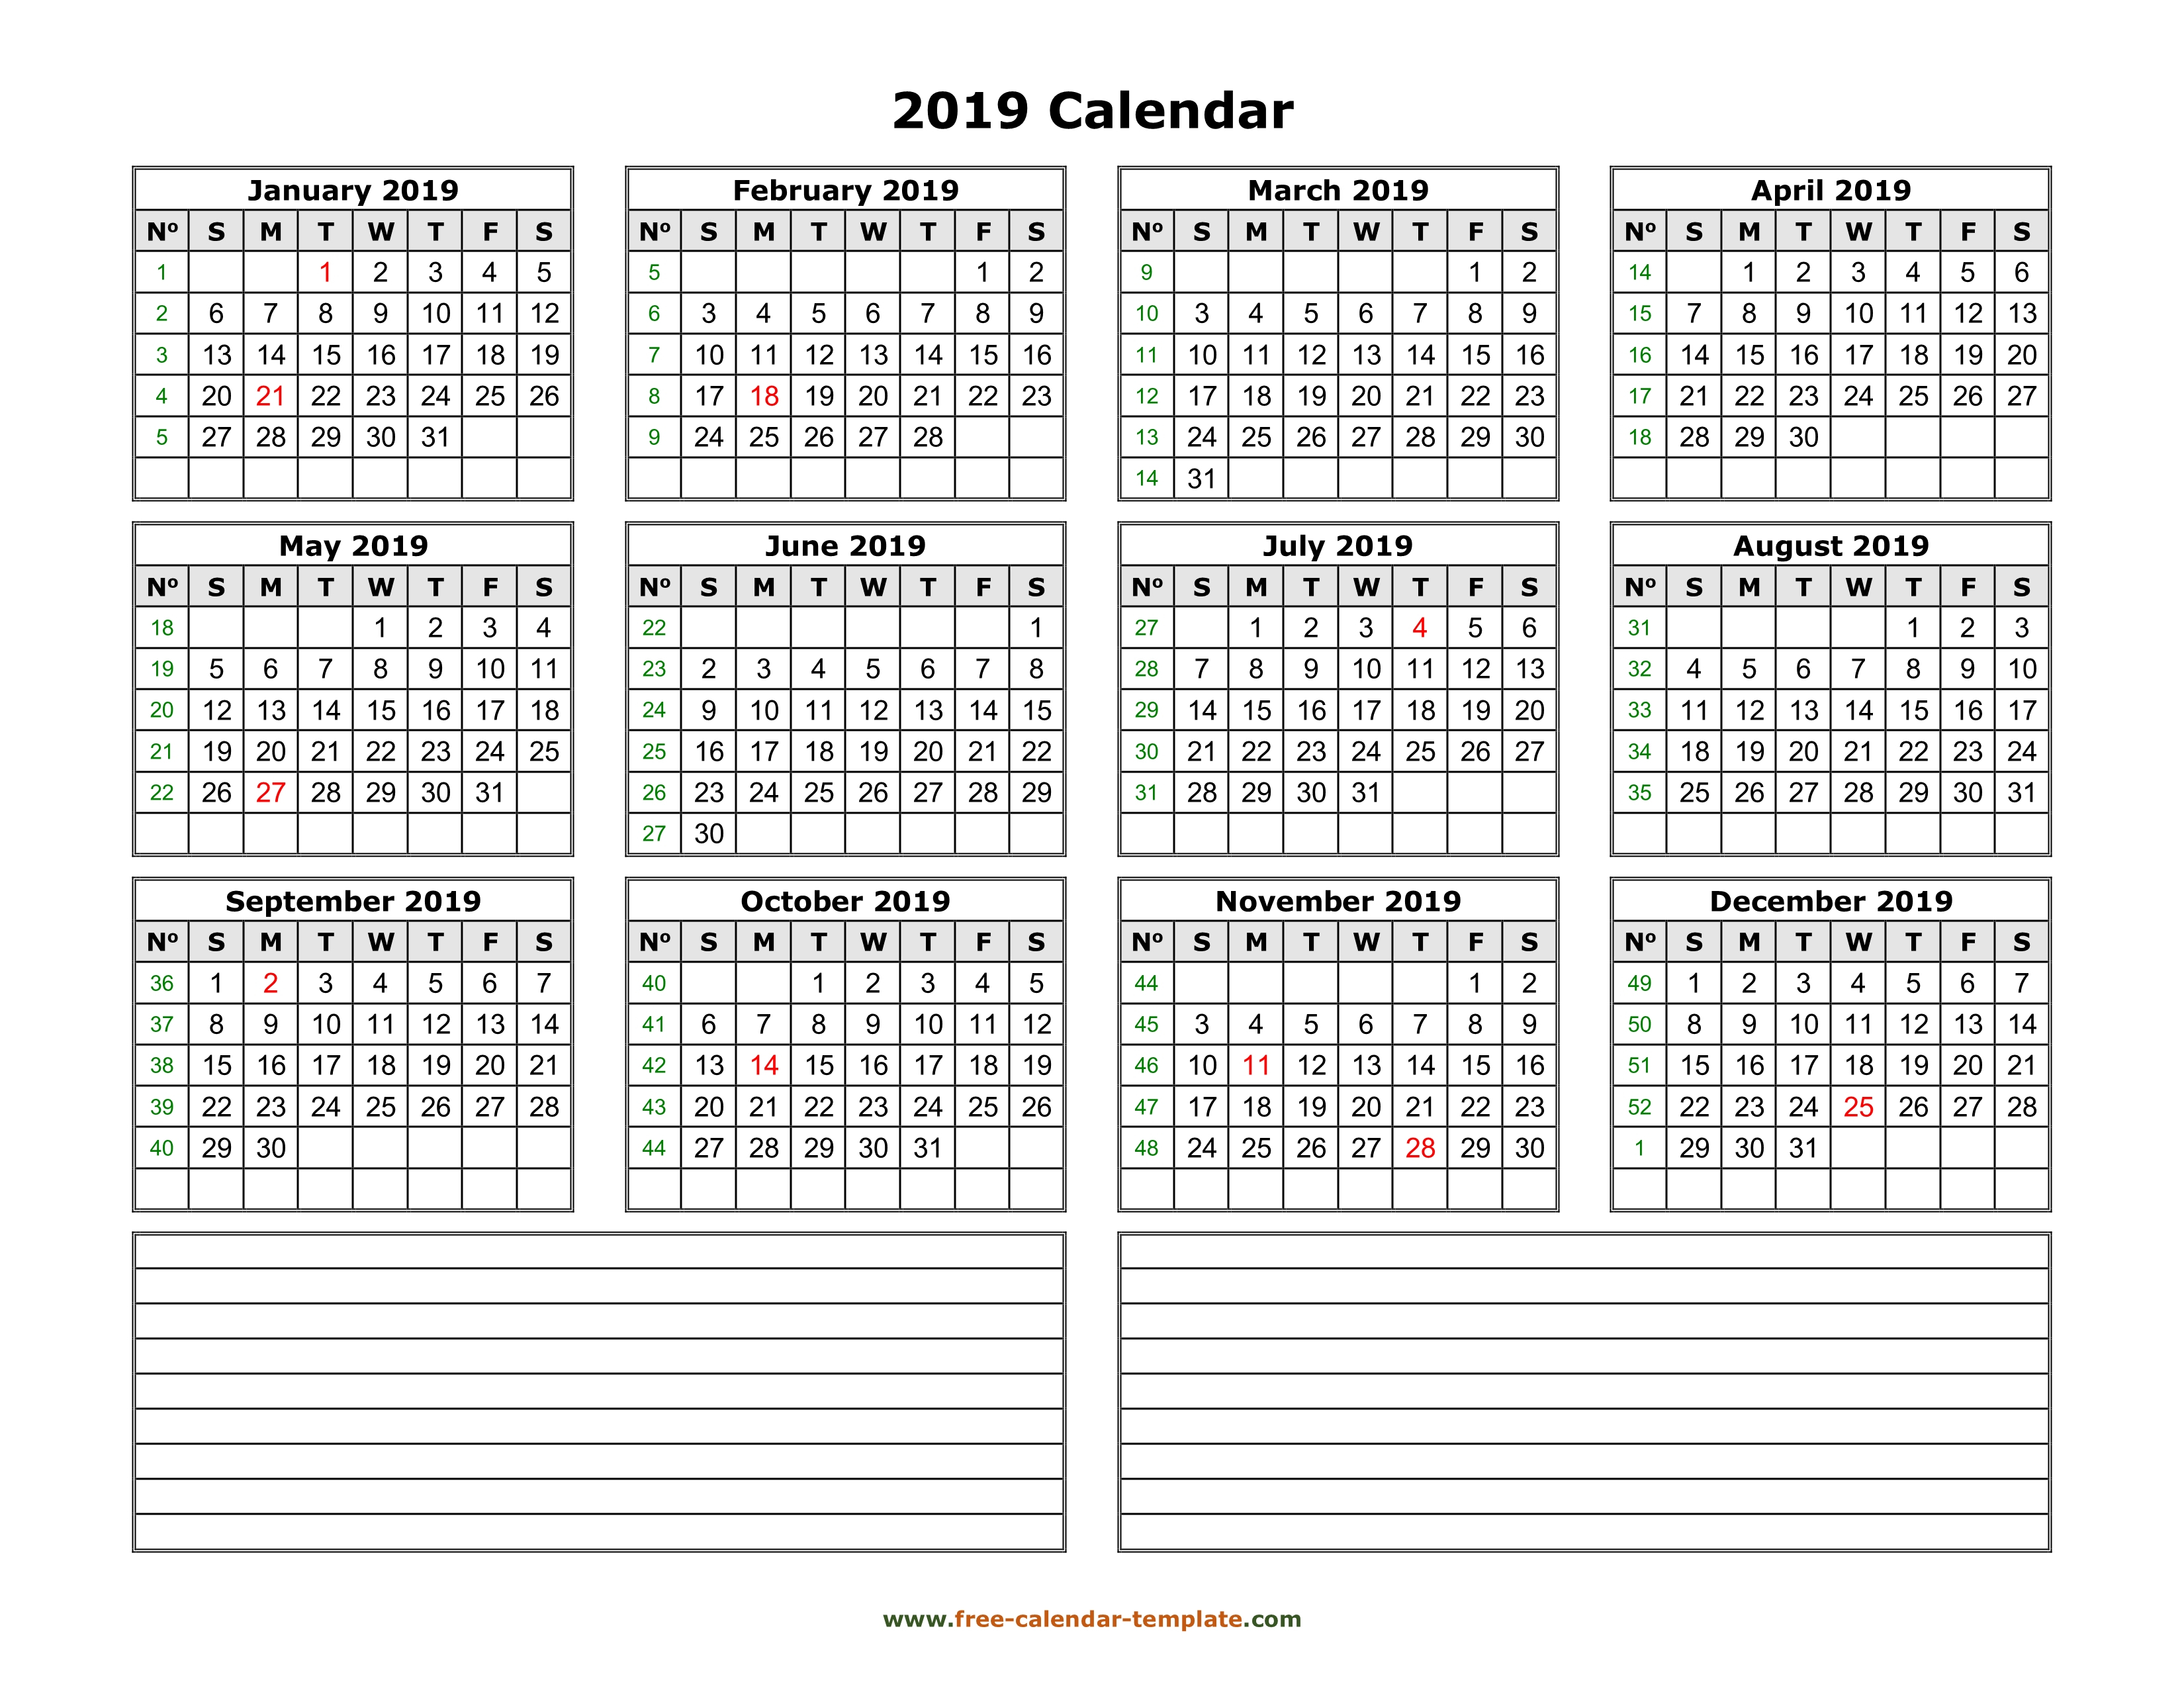 Yearly 2019 Calendar Printable With Space For Notes | Free